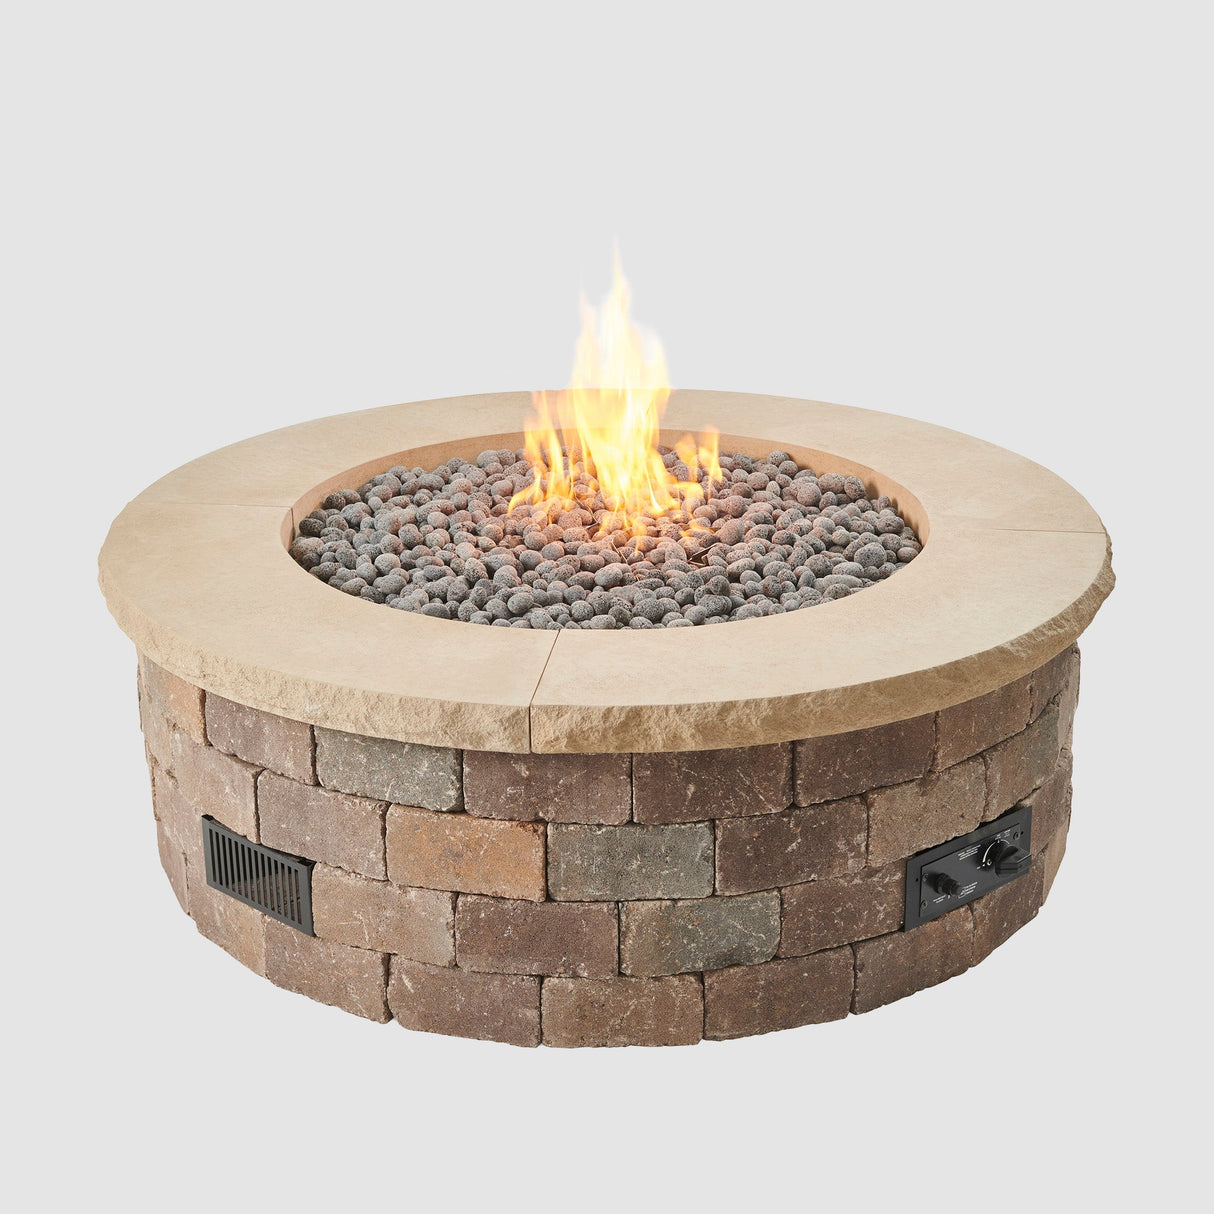 Limestone Tan Concrete Top for Round Bronson Block Gas Fire Pit Kit with flame on grey background